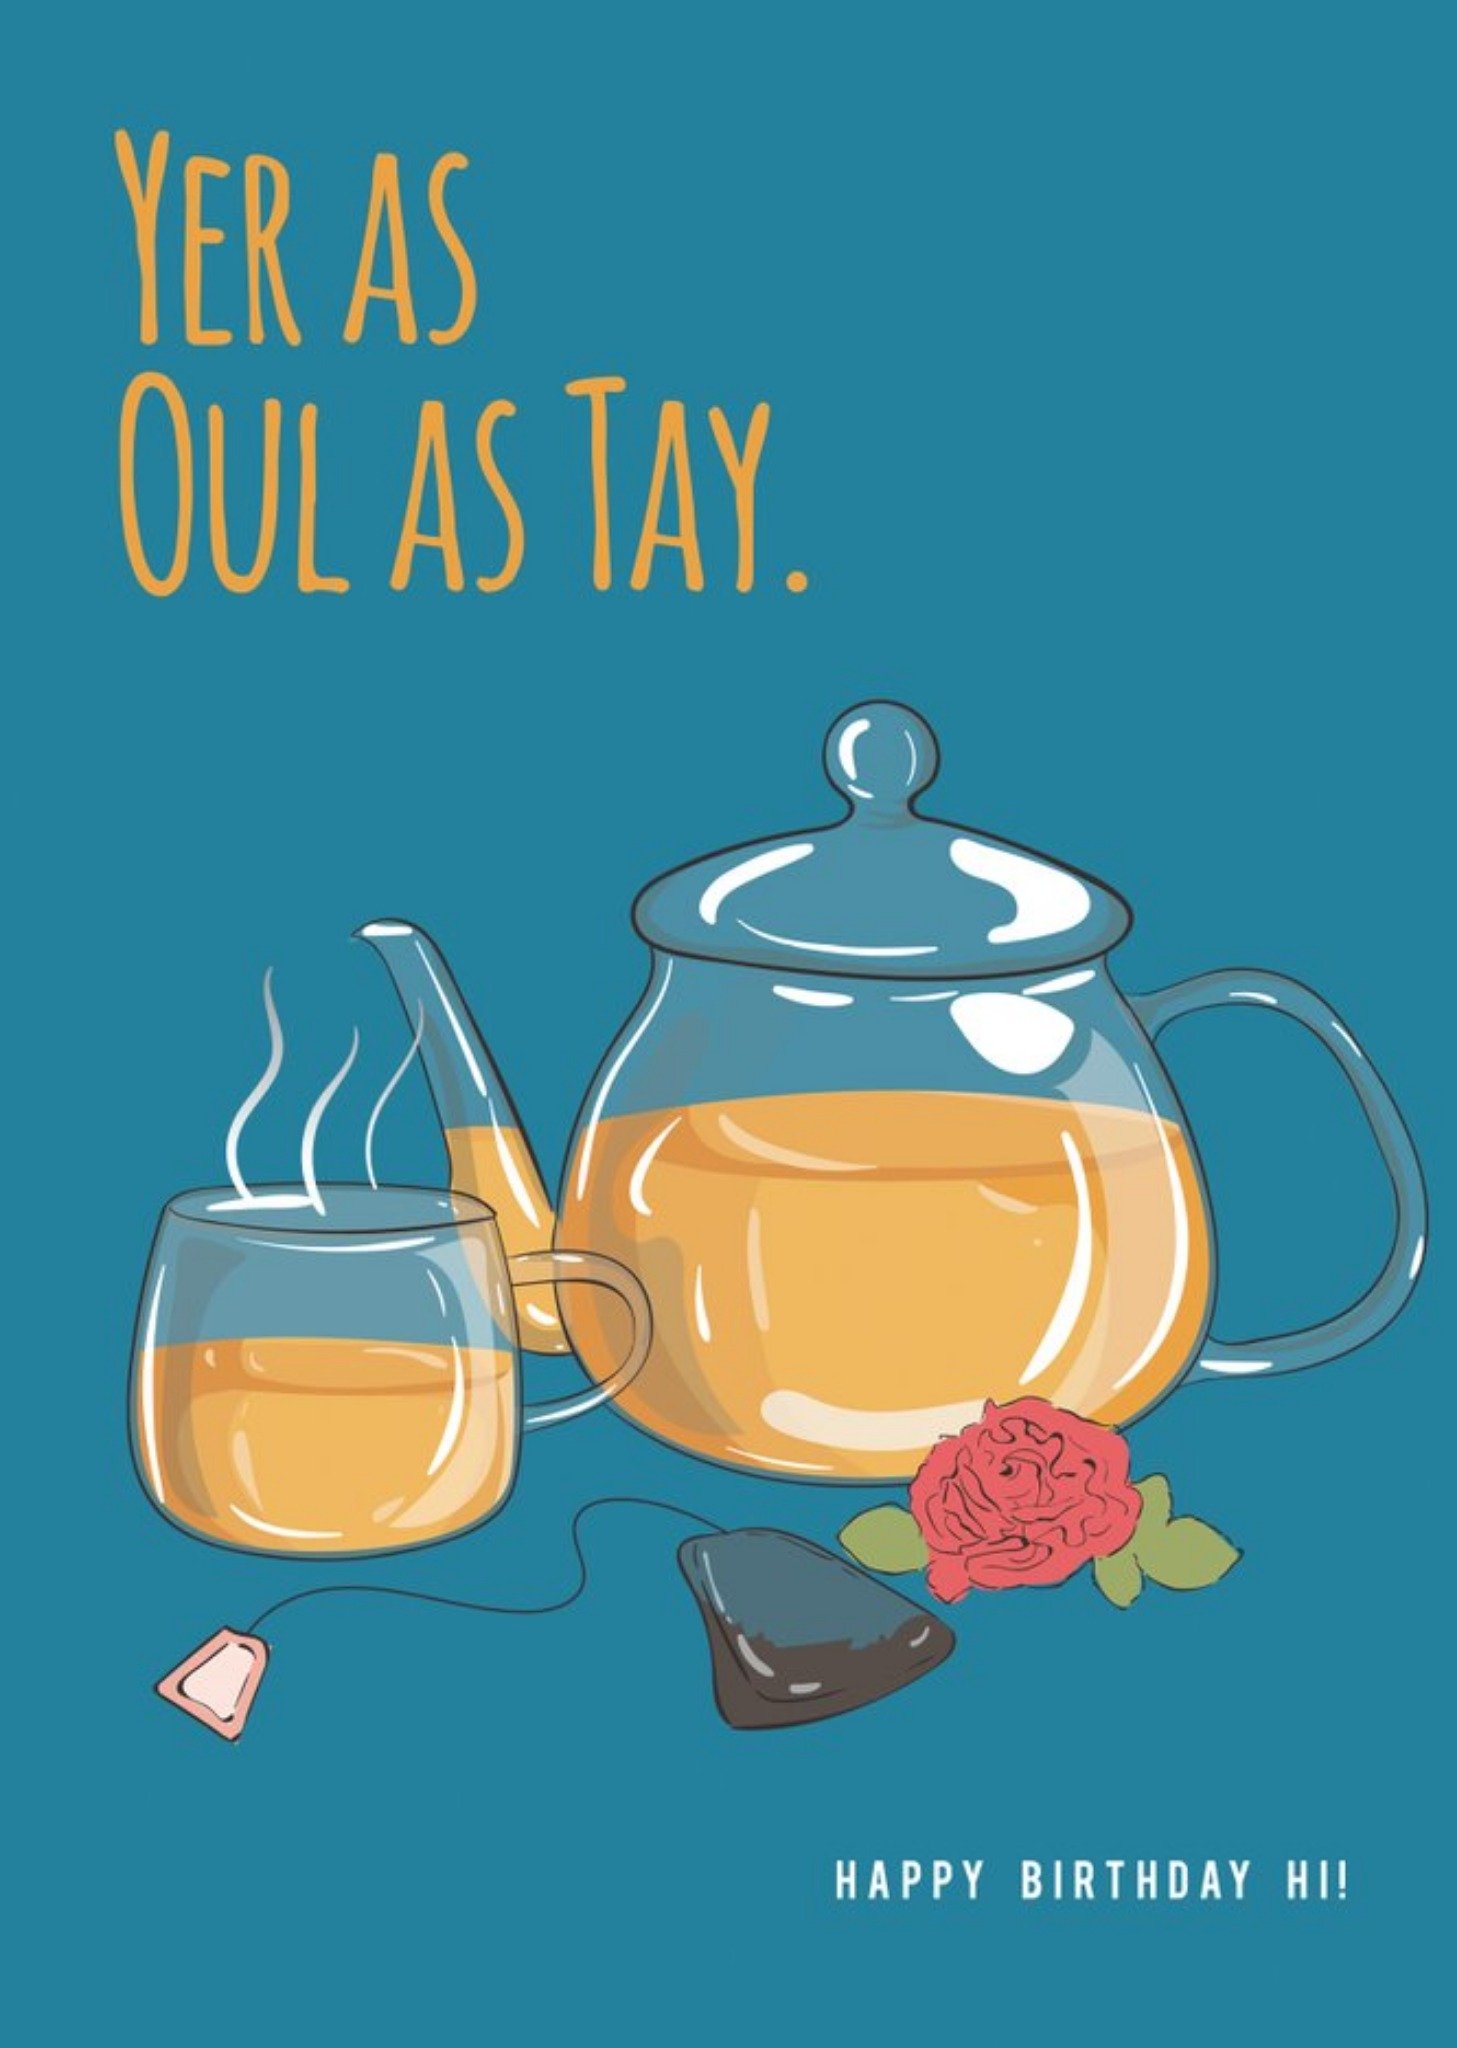 Moonpig Illustration Of A Glass Tea Pot And Cup Of Tea Yer As Oul As Tay Humourous Birthday Card, La